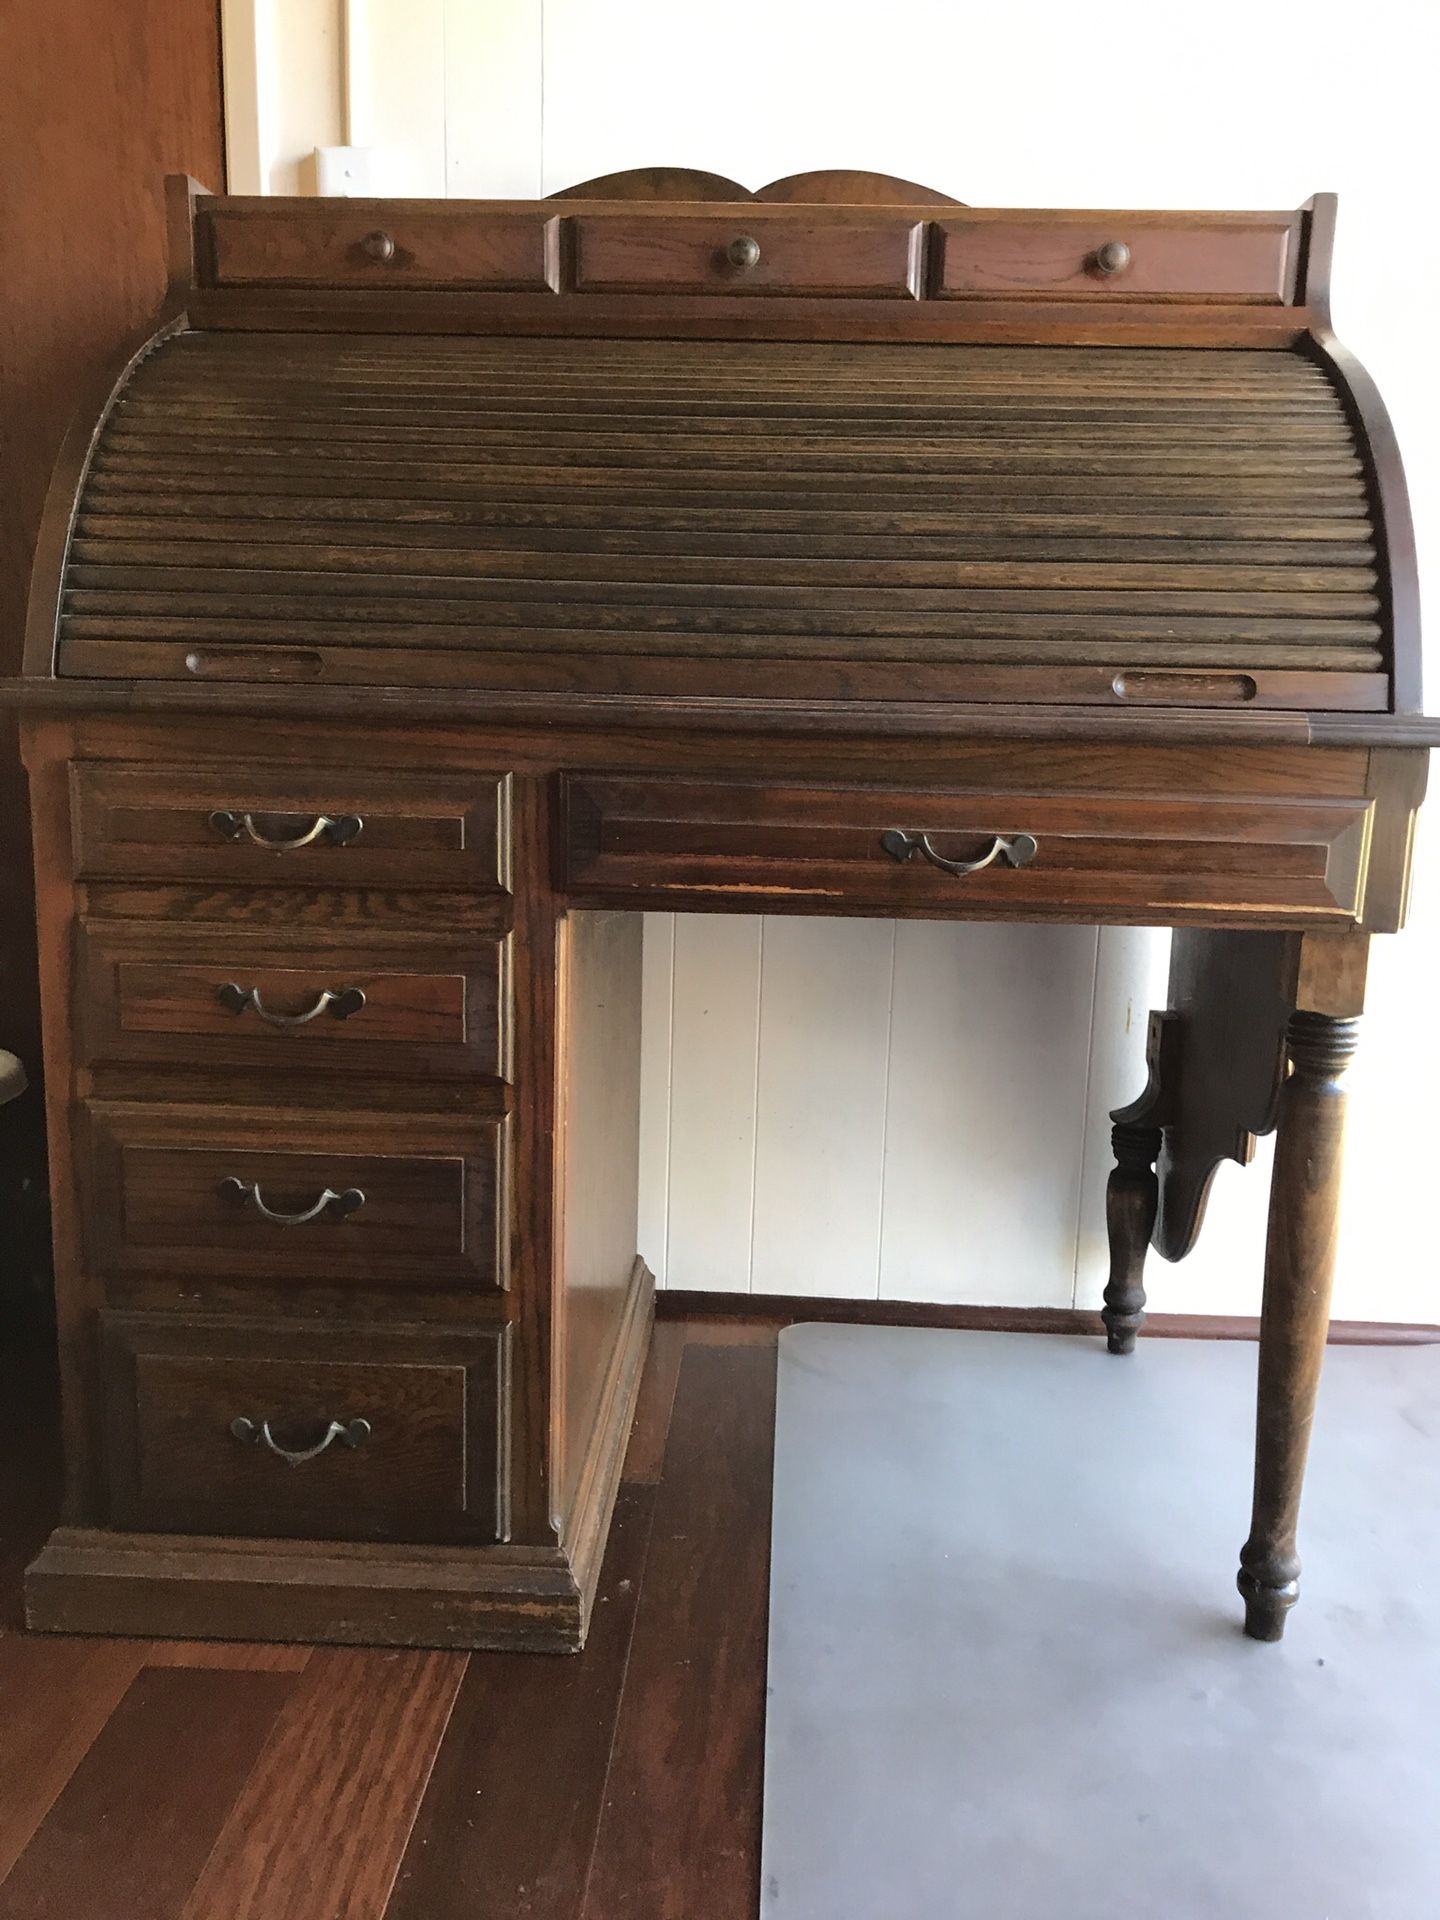 Rolled top desk built by antique craftsman over 70 years ago